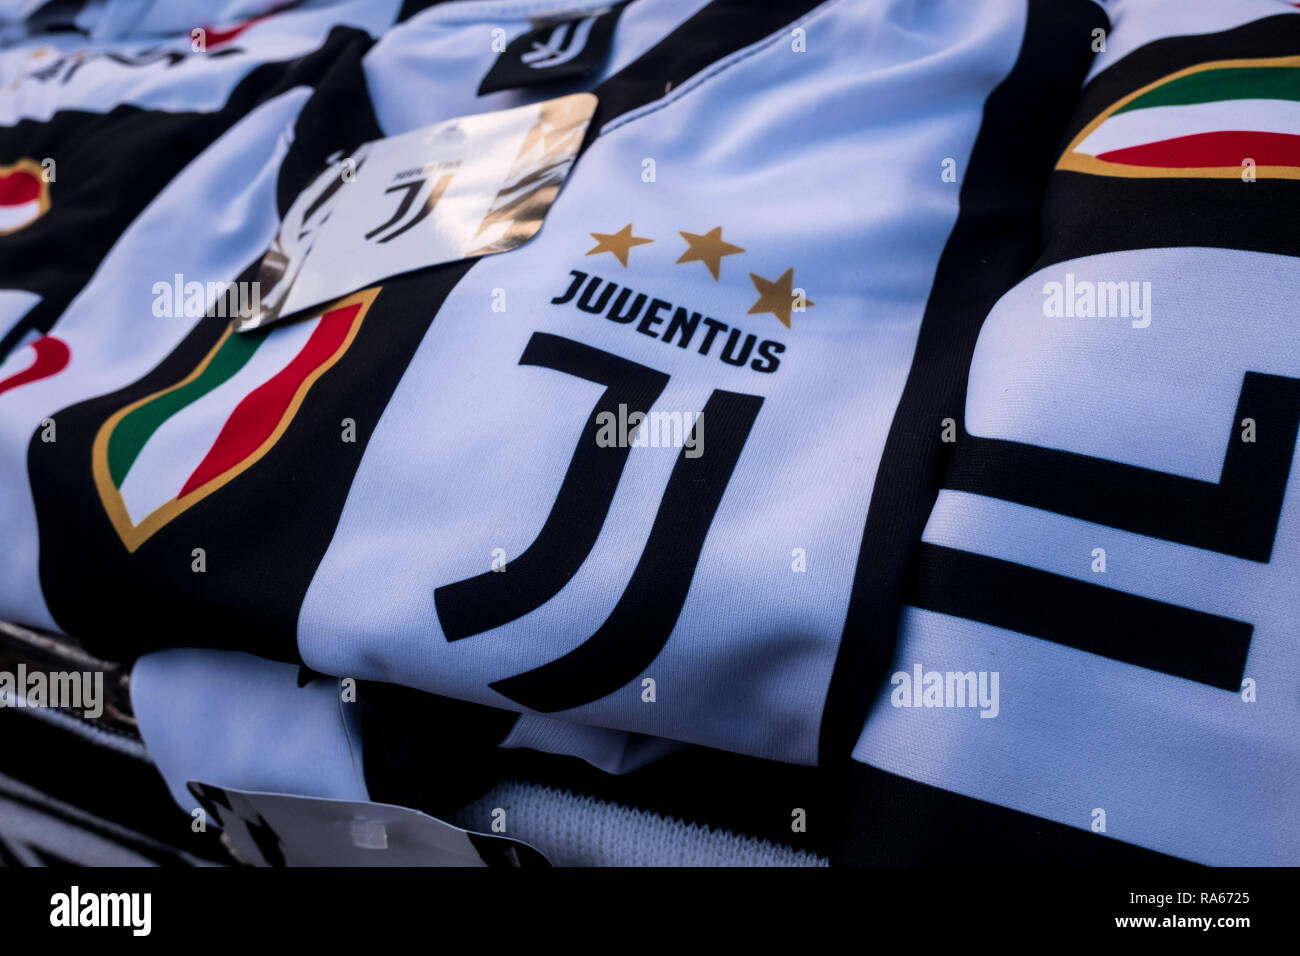 Milan, Italy. 1st January, 2019. Milan, Inter and Juventus t-shirts and  gadgets for sale at a street vendor in front of the San Siro stadium, on  January 01 2019 Credit: Mairo Cinquetti/Alamy